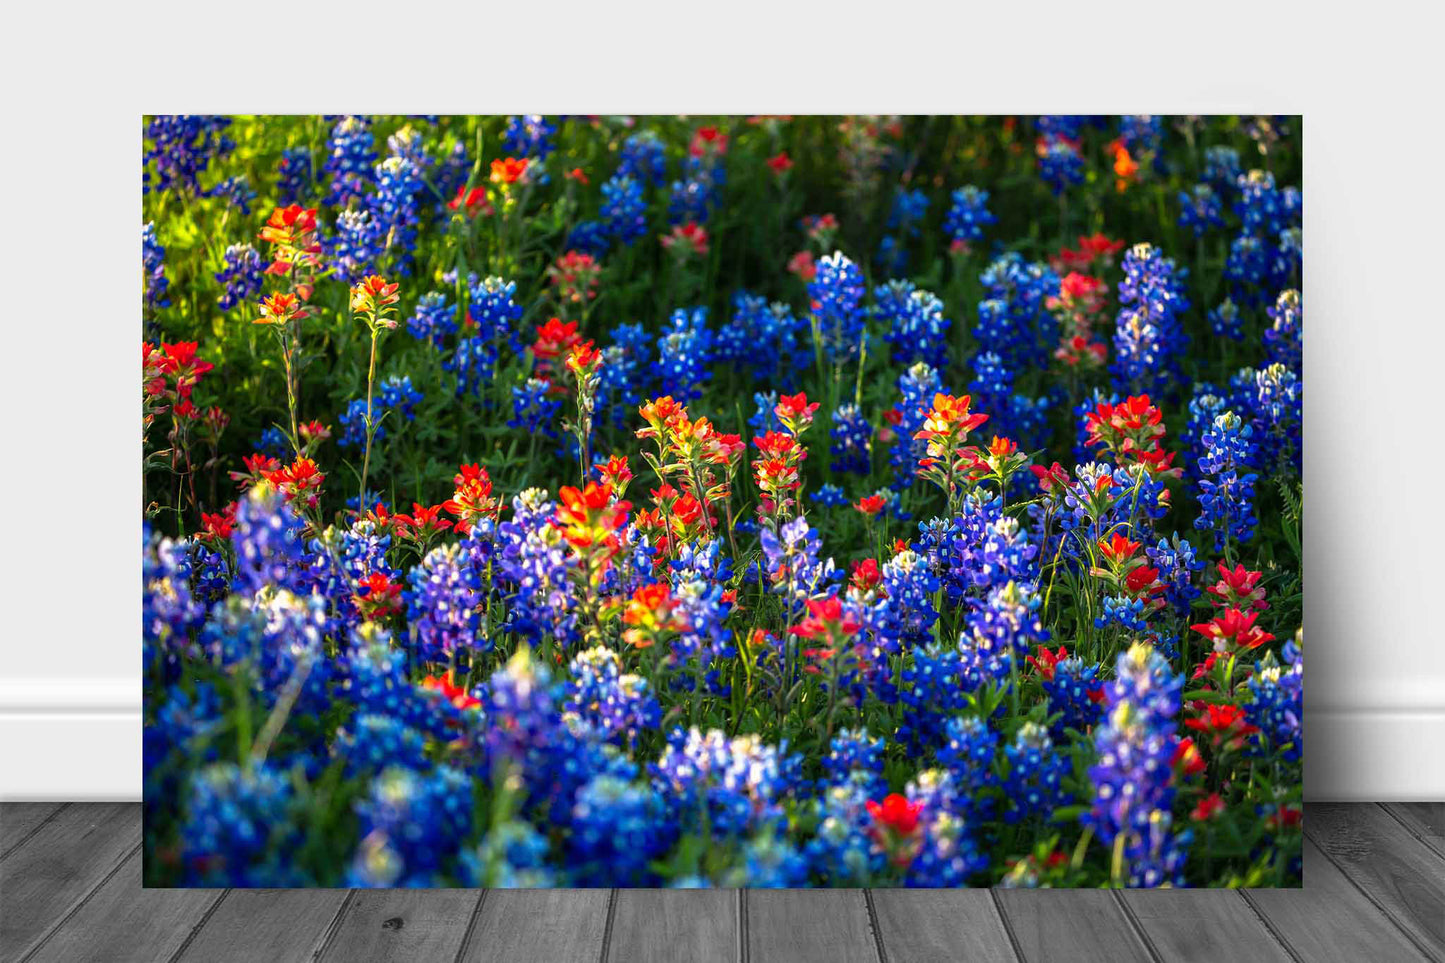 Floral metal print on aluminum of bluebonnets and Indian Paintbrush wildflowers on a spring day in Texas by Sean Ramsey of Southern Plains Photography.